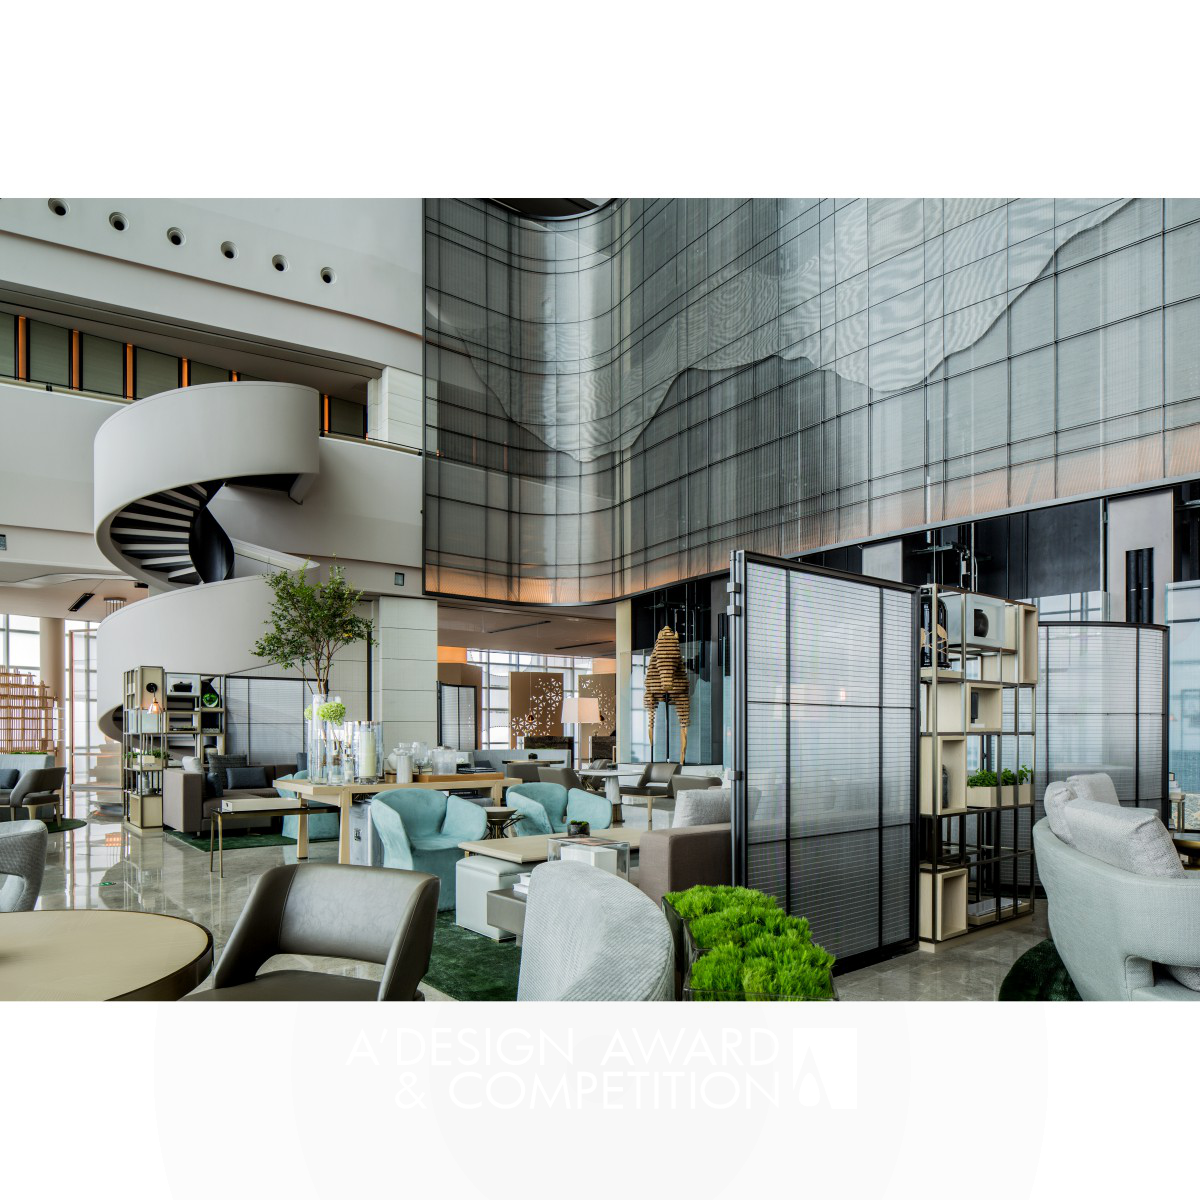 Shenzhen Marriott Hotel by ATG - Asiantime International Construction Silver Construction and Real Estate Projects Design Award Winner 2019 